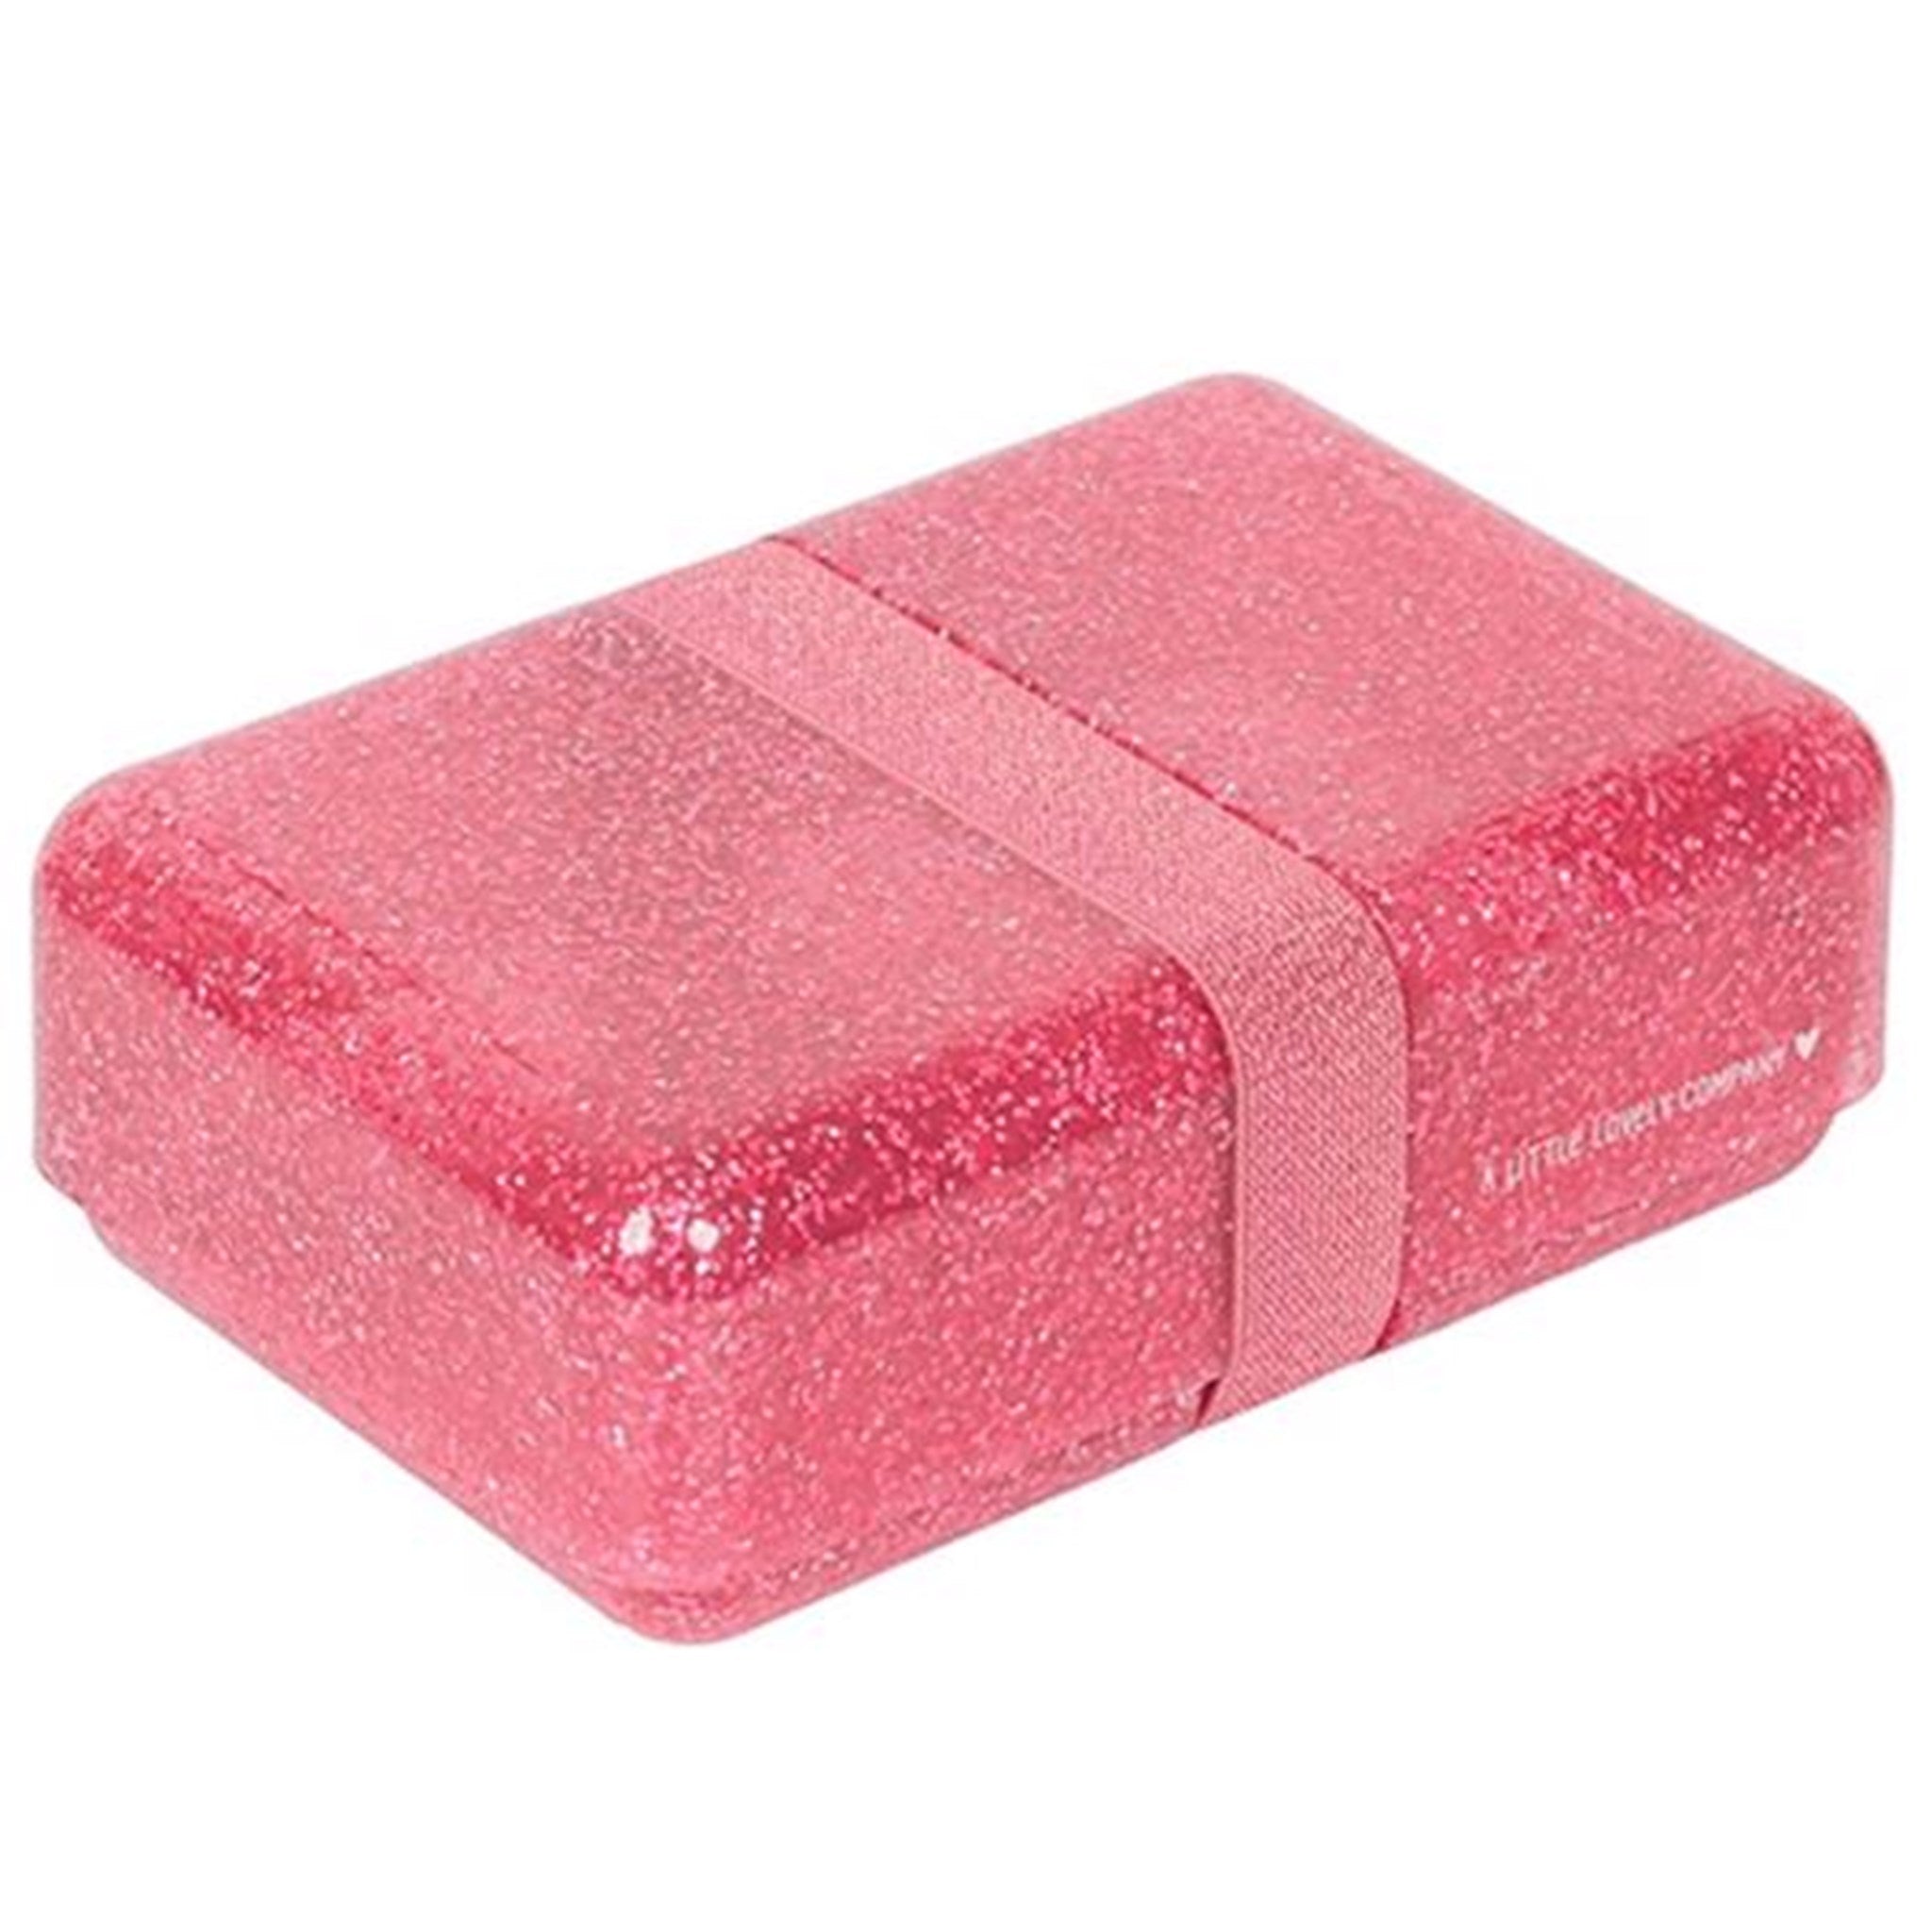 A Little Lovely Company Lunchbox Glitter Pink